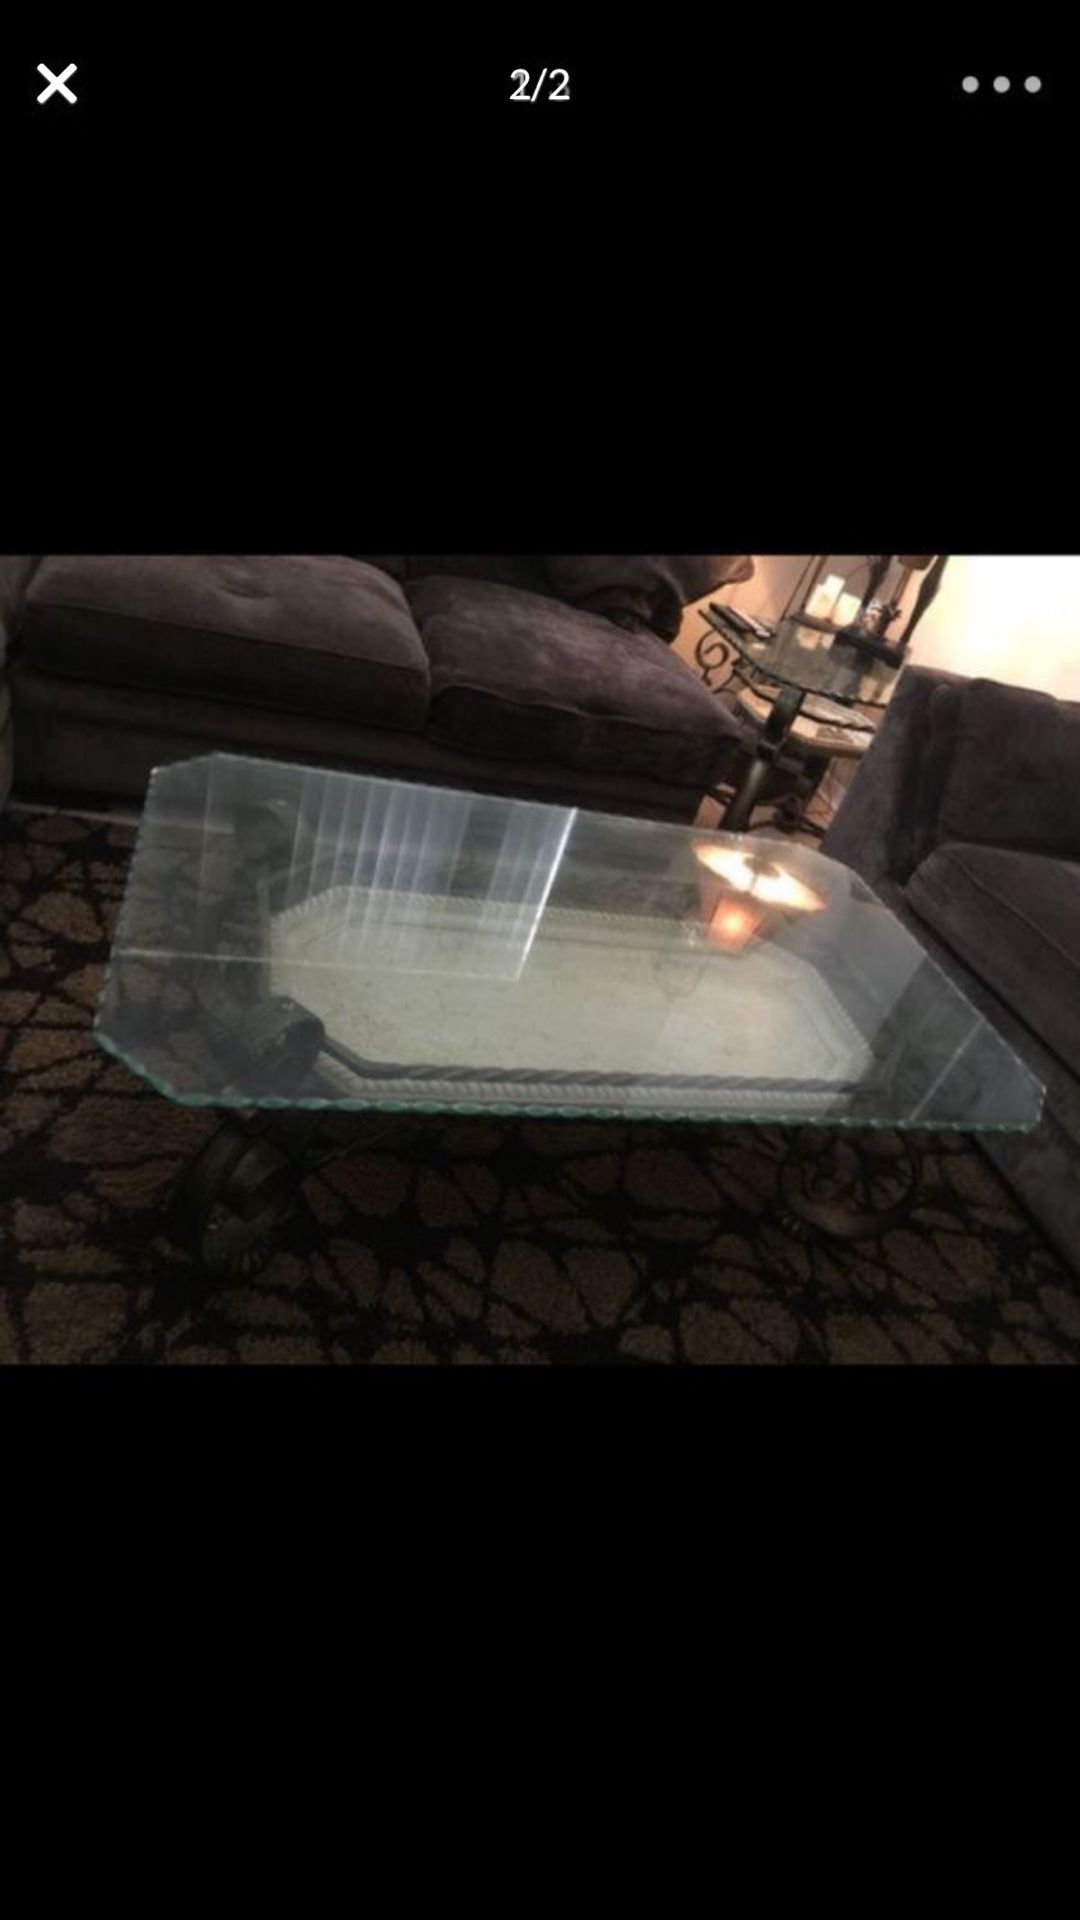 Set of 4 glass tables 1 coffee 2 side and one console table all for 300